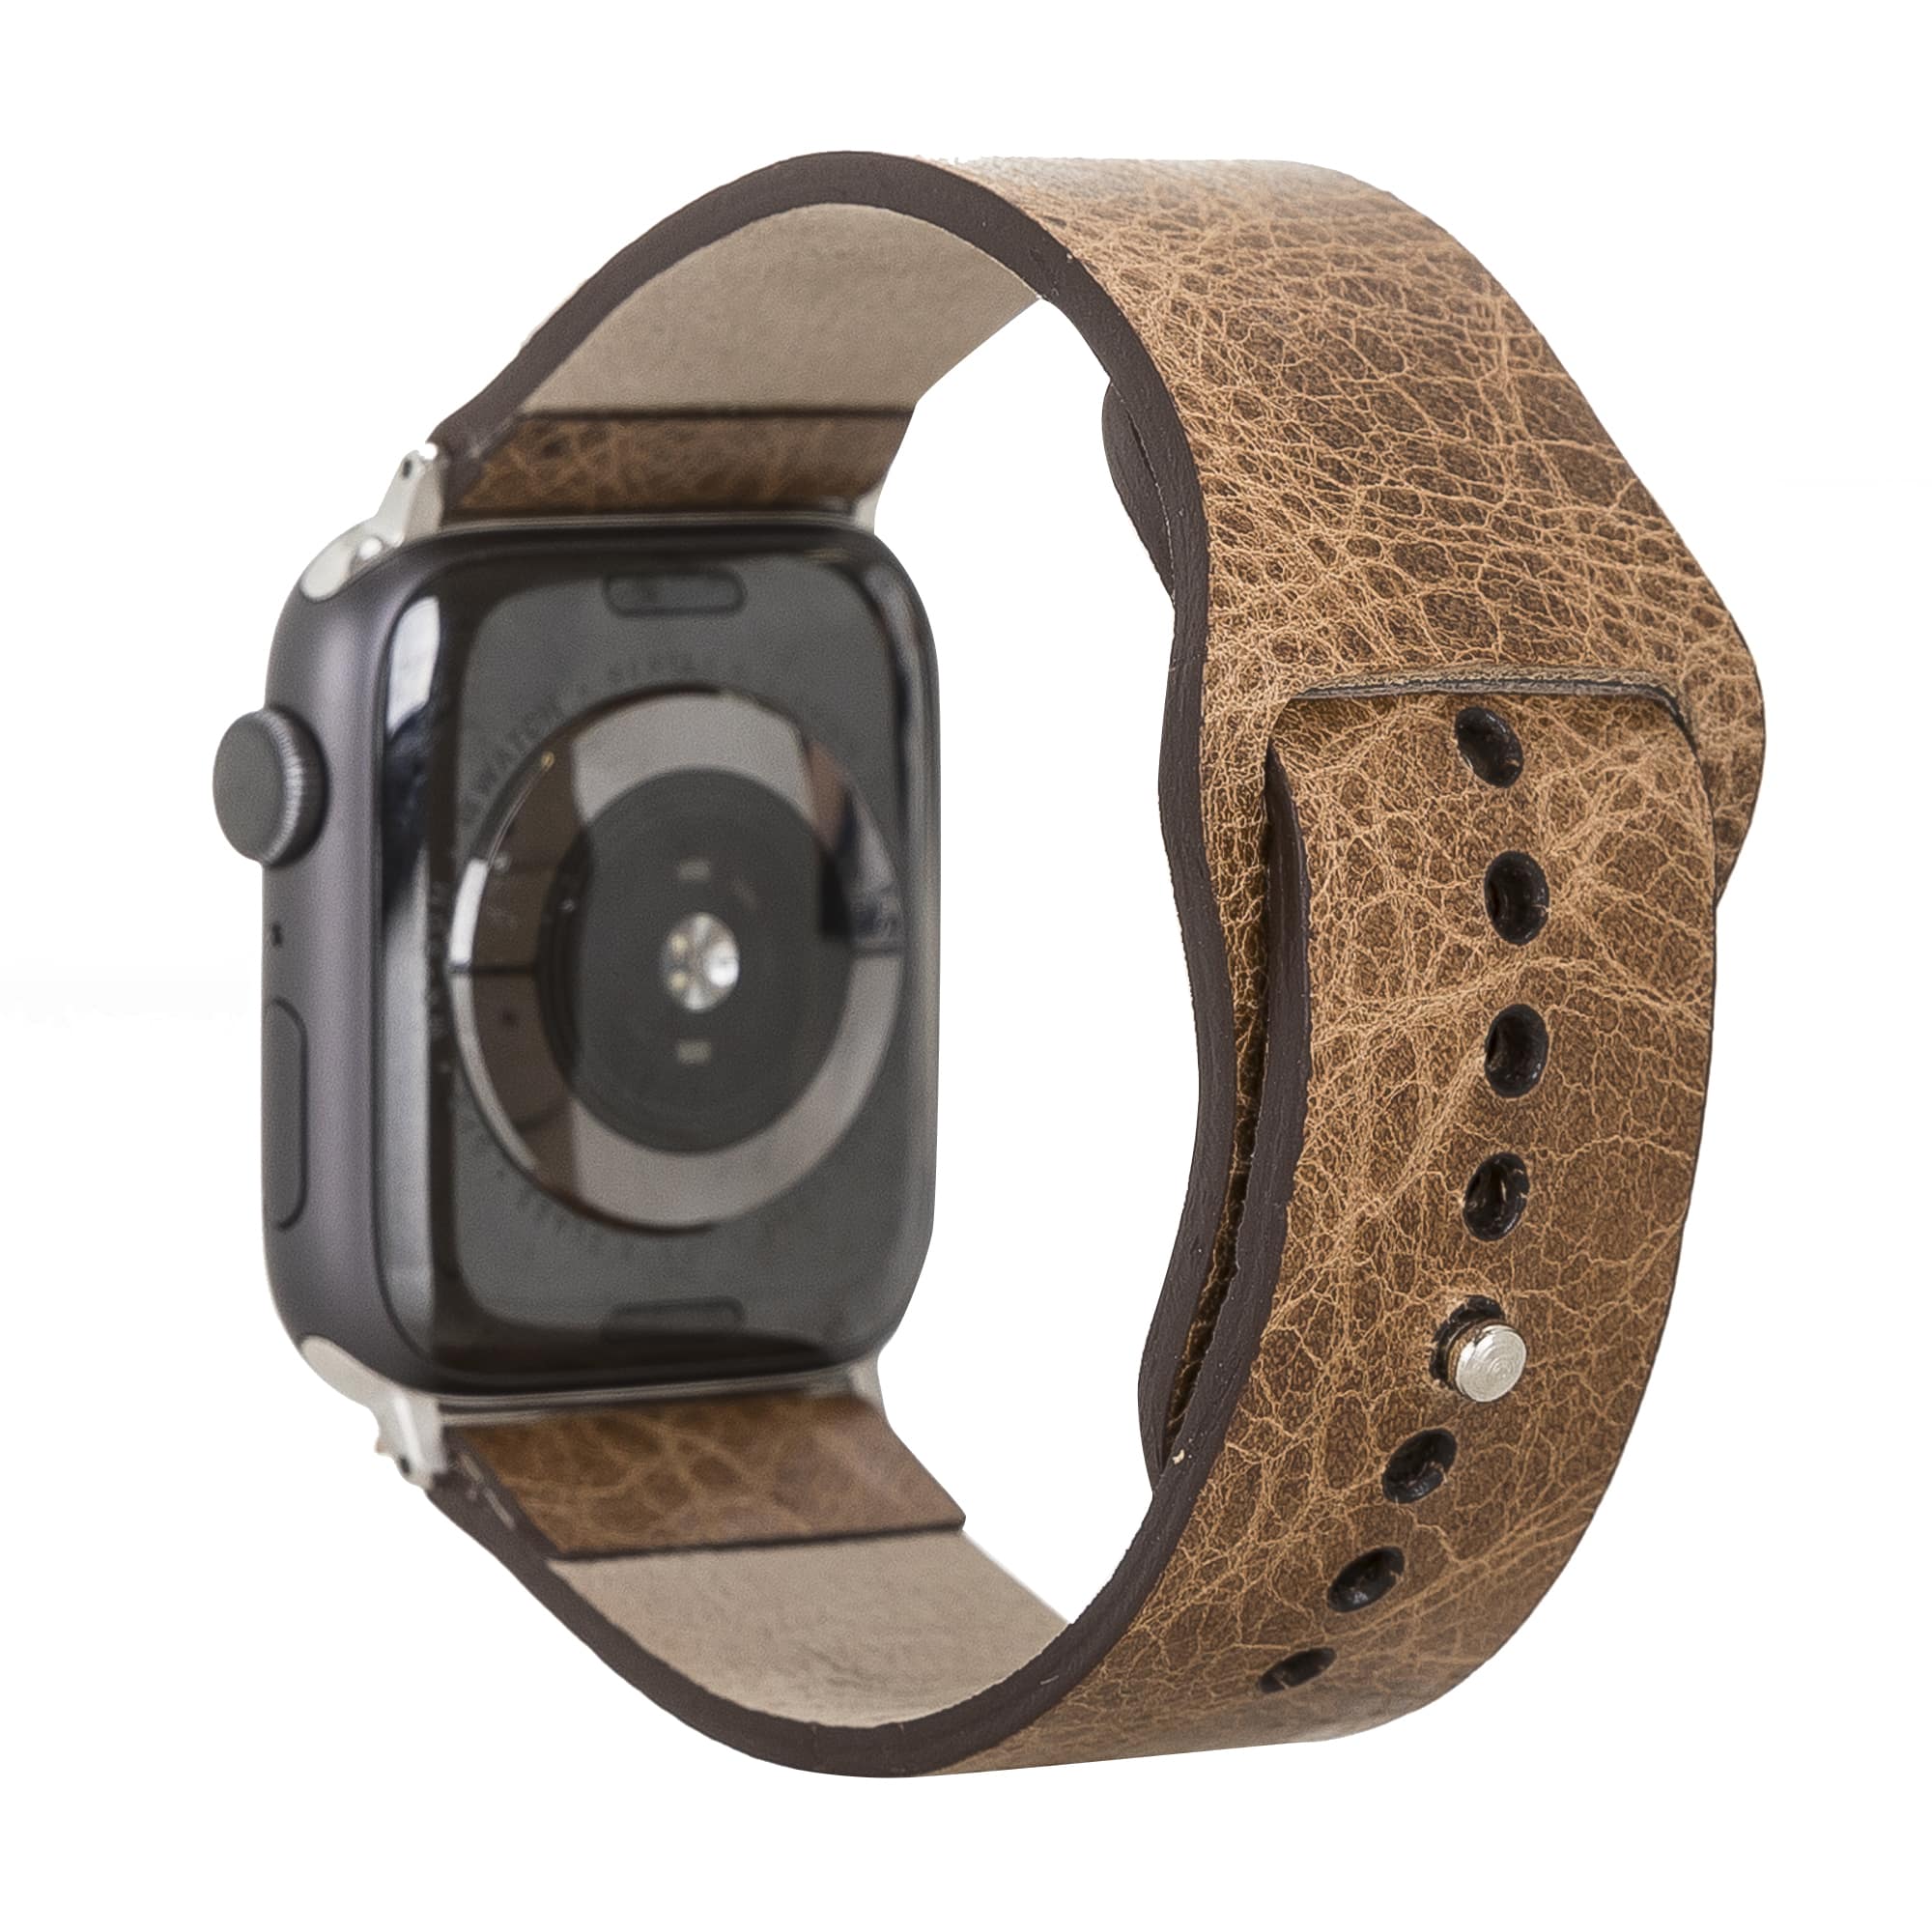  Sutton Classic Brown Genuine Leather Apple Watch Band Strap 38mm 40mm 42mm 44mm 45mm for All Series - Bomonti - 2